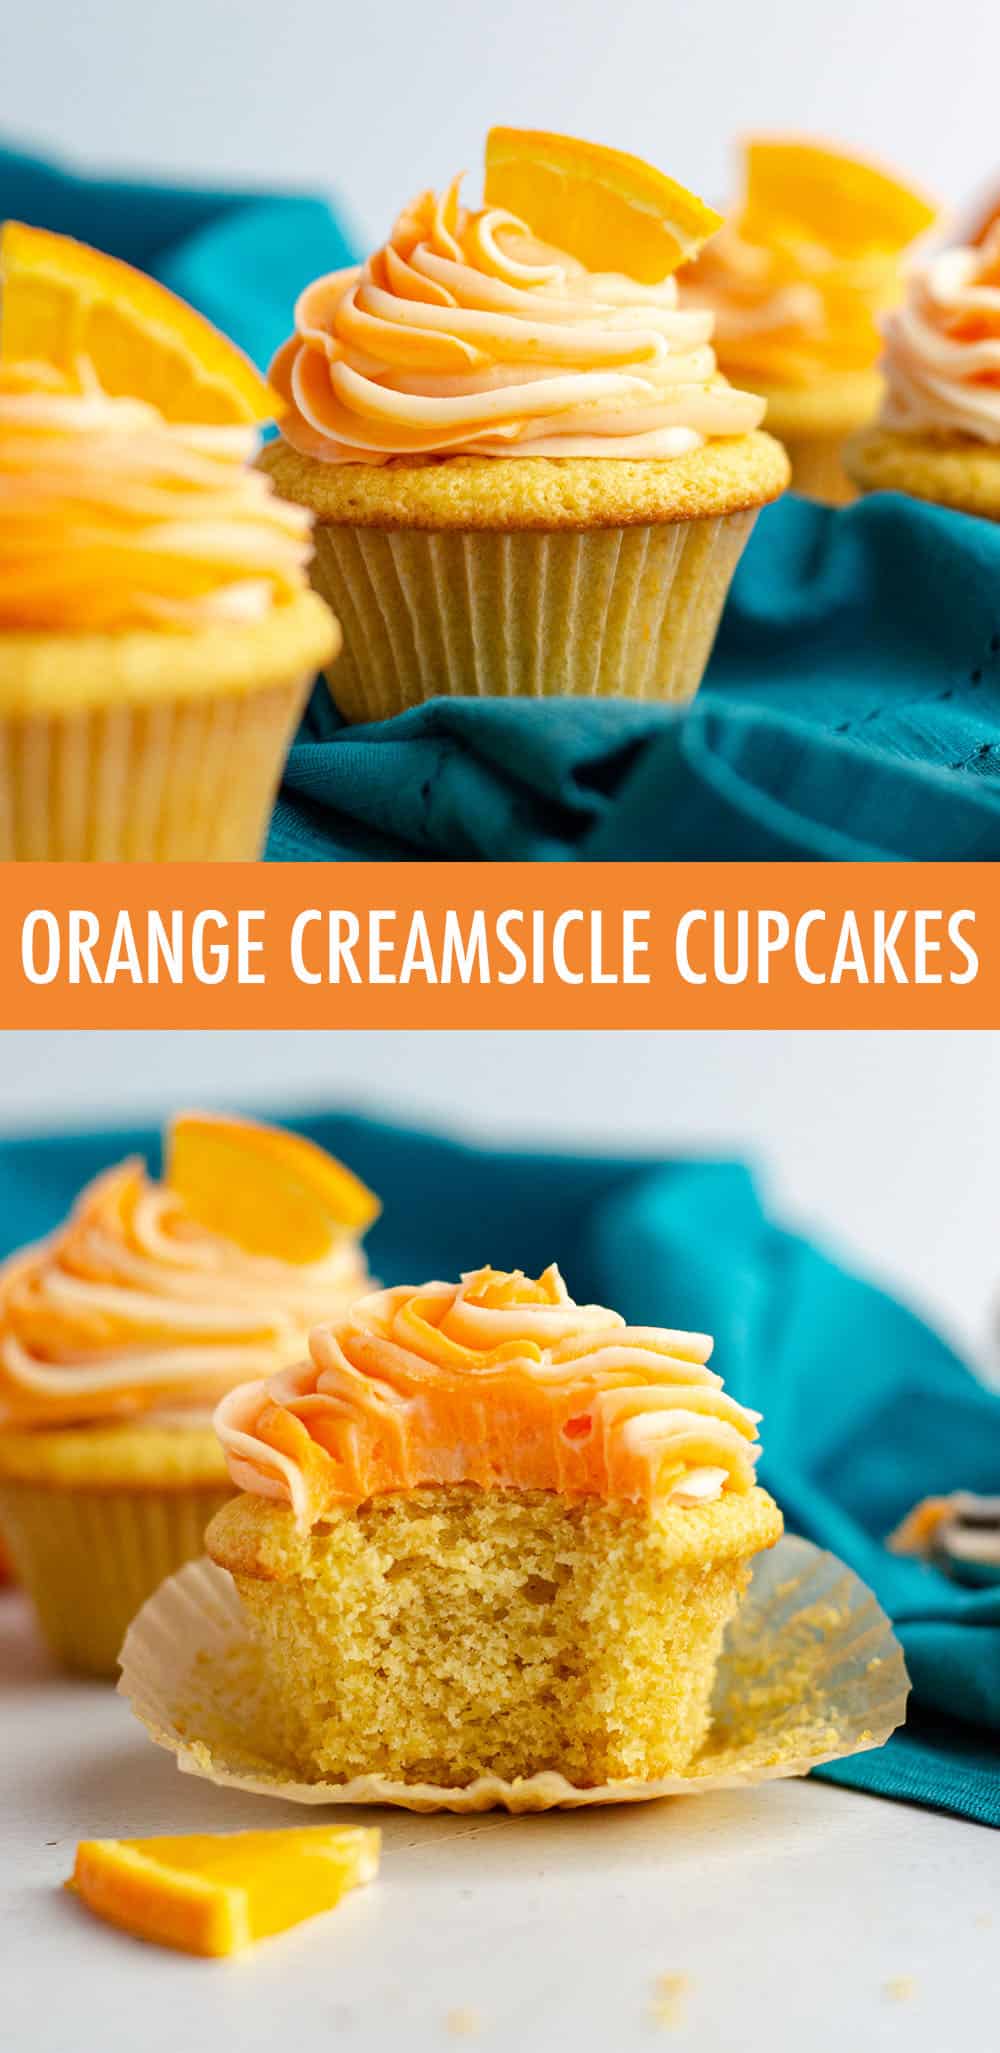 Simple orange cupcakes topped with swirls of orange and cream cheese frostings. via @frshaprilflours